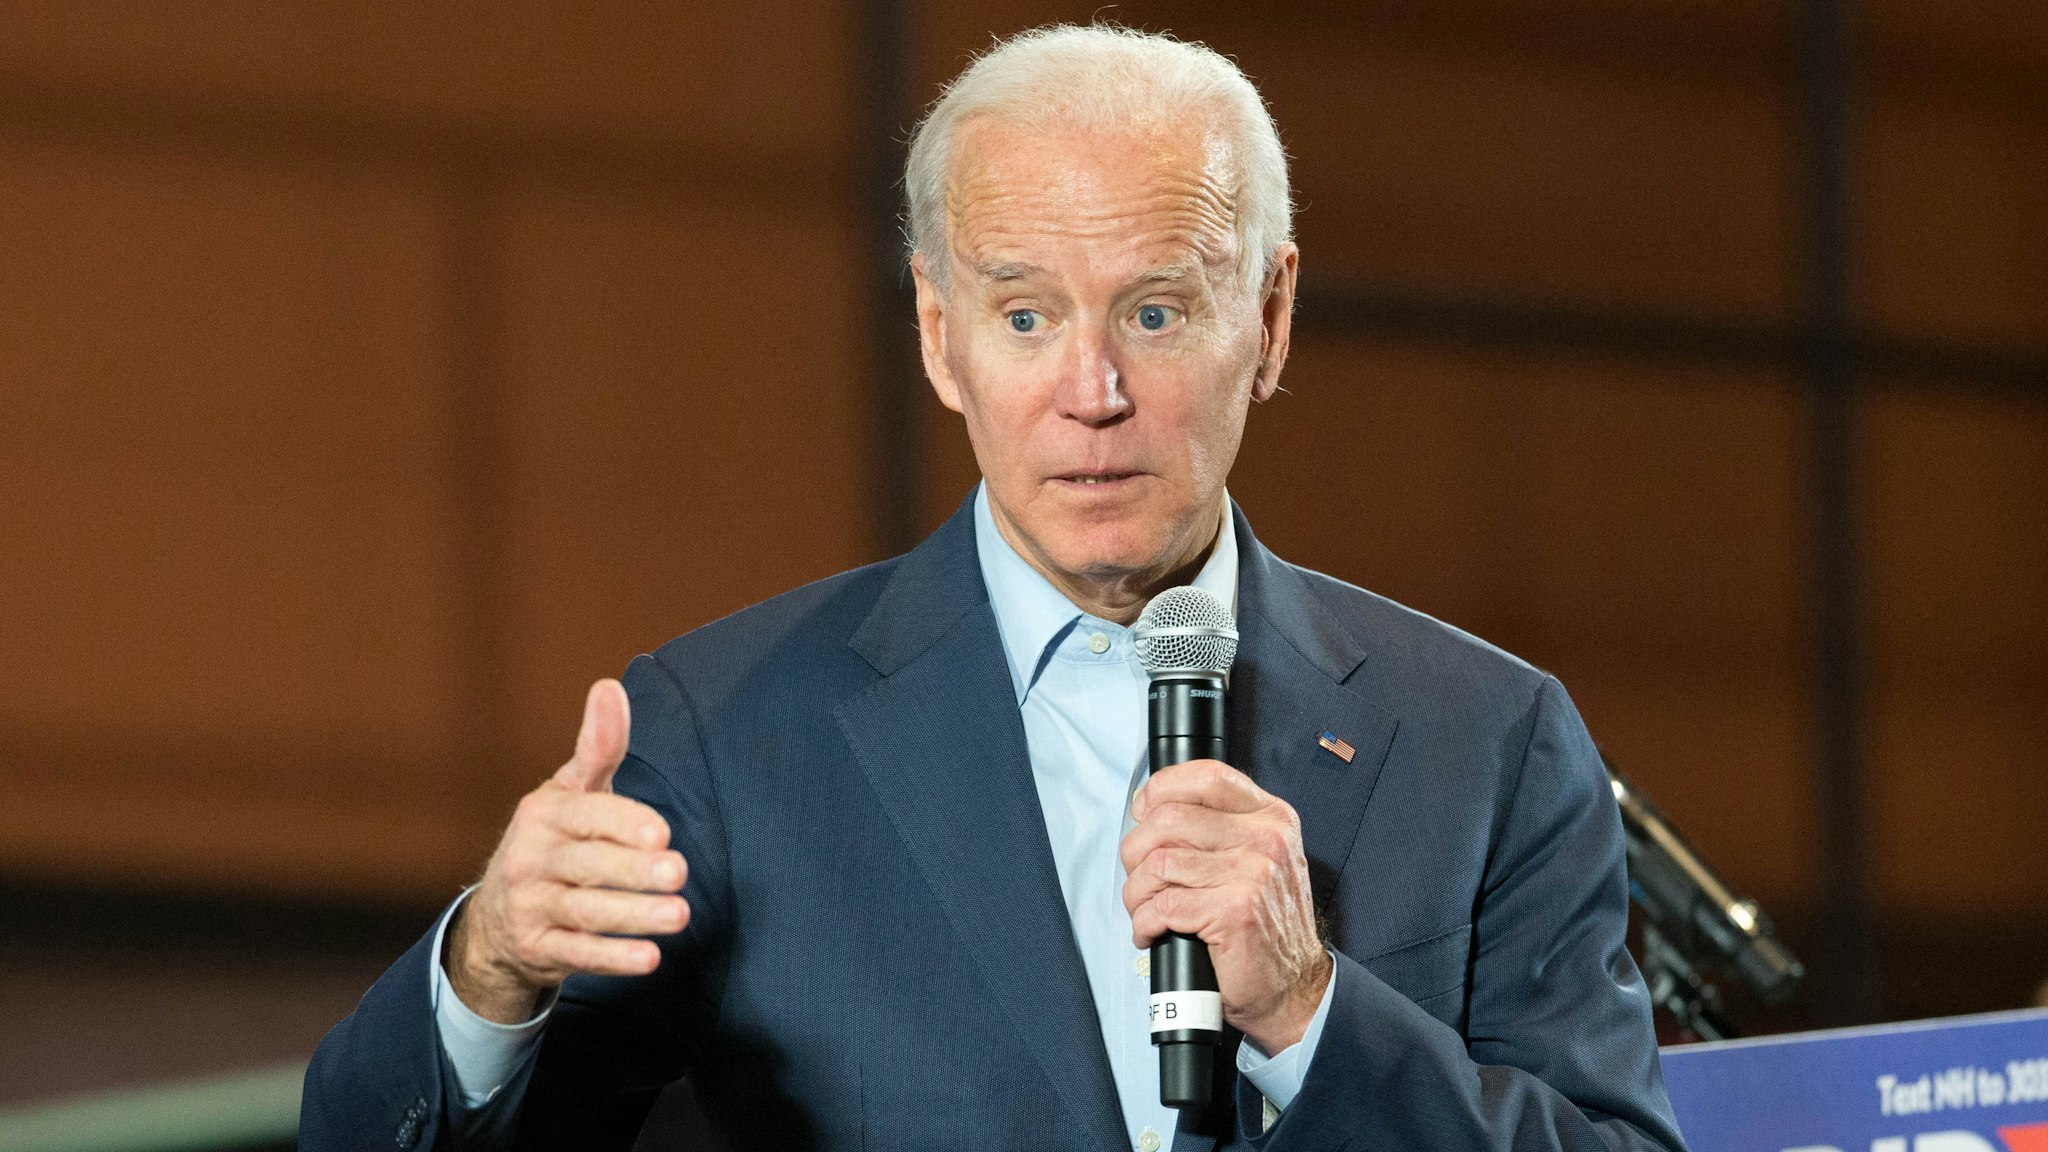 Democratic presidential candidate, former Vice President Joe Biden speaks during a campaign Town Hall on December 30, 2019 in Derry, New Hampshire. The 2020 Iowa Democratic caucuses will take place on February 3, 2020, making it the first nominating contest for the Democratic Party in choosing their presidential candidate to face Donald Trump in the 2020 election.